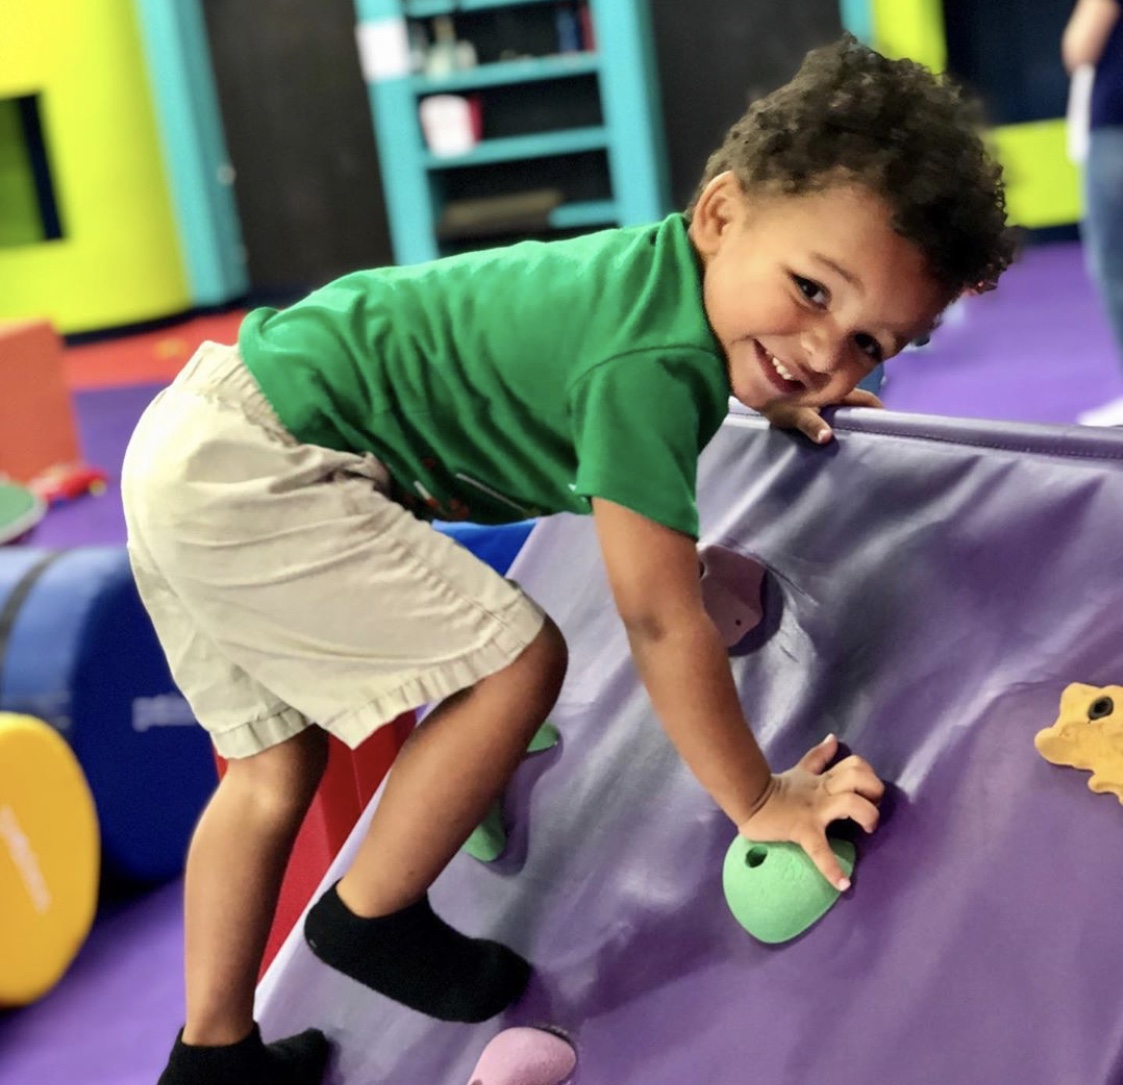 This sweet, smiling tot loves our toddler classes in Charlotte.